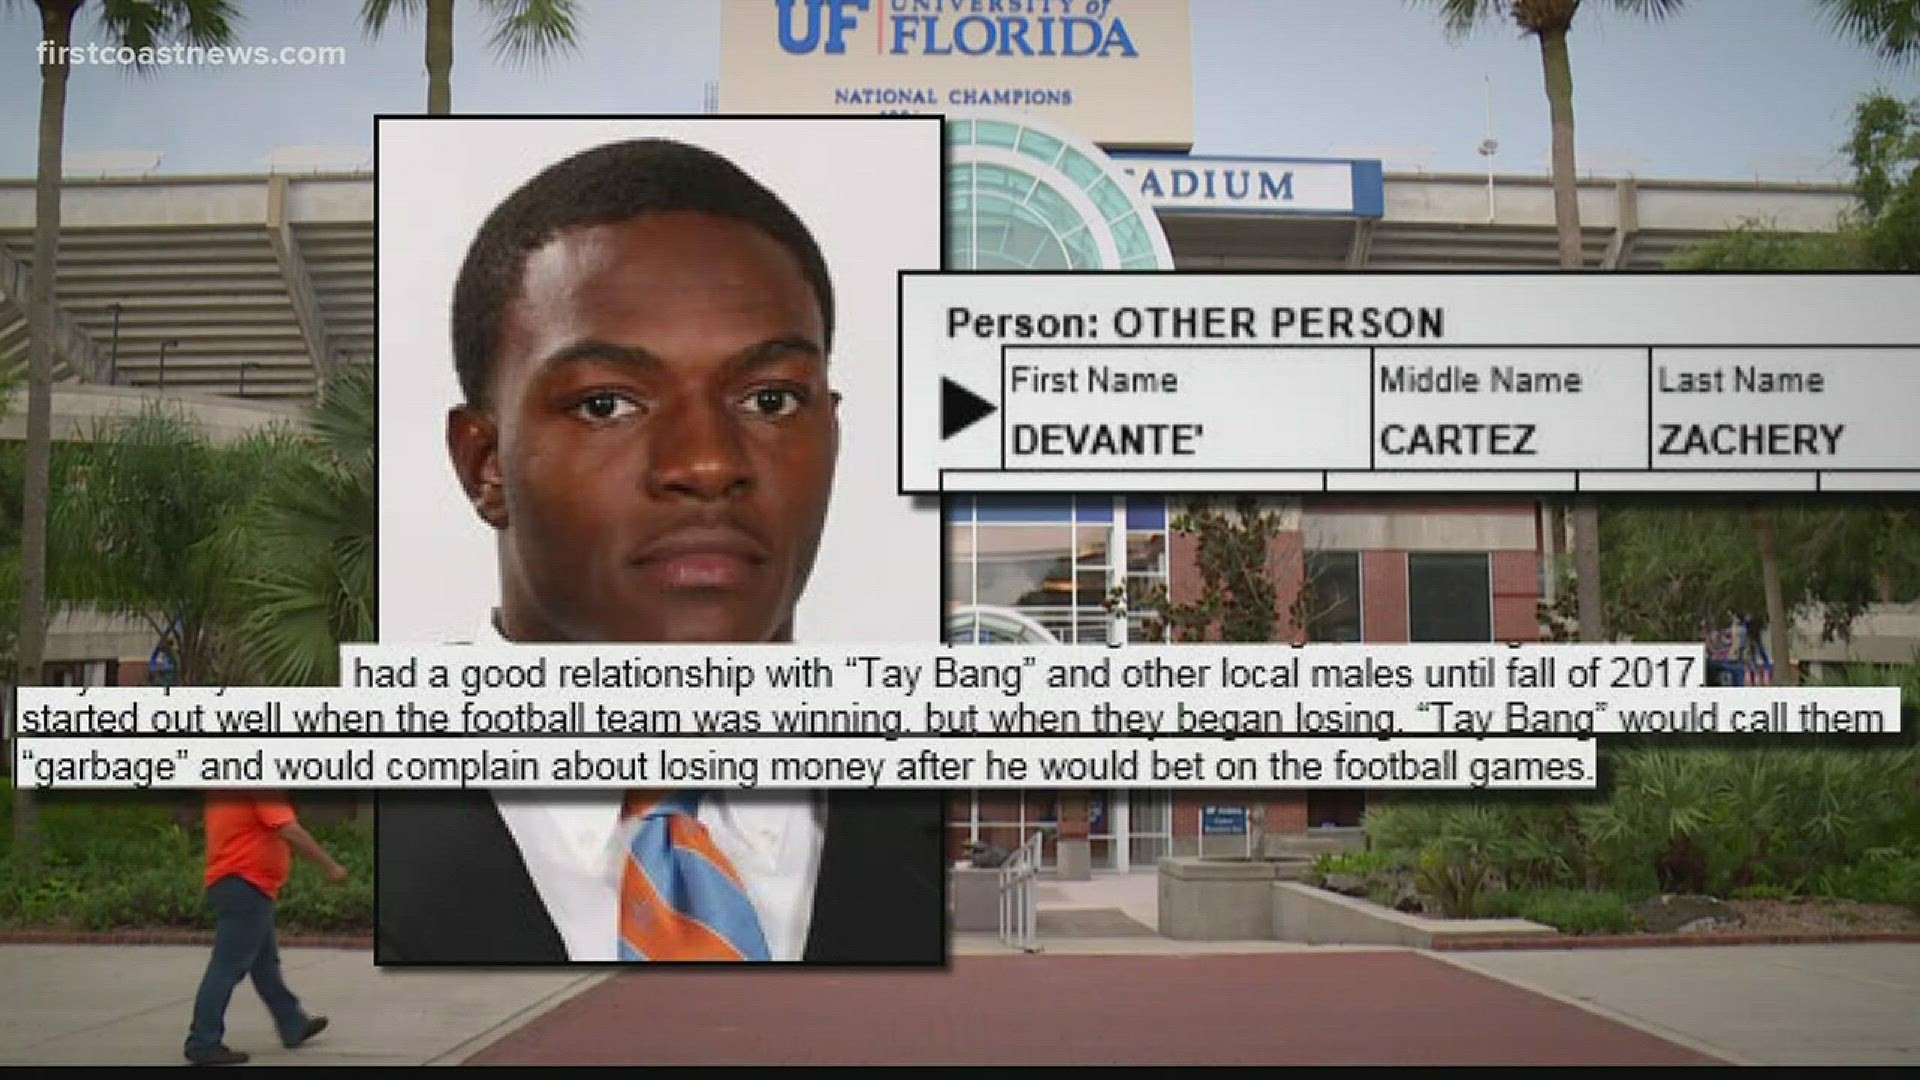 Less than 48 hours before the start of fall camp, members of the University of Florida football team continue to make headlines off the field.